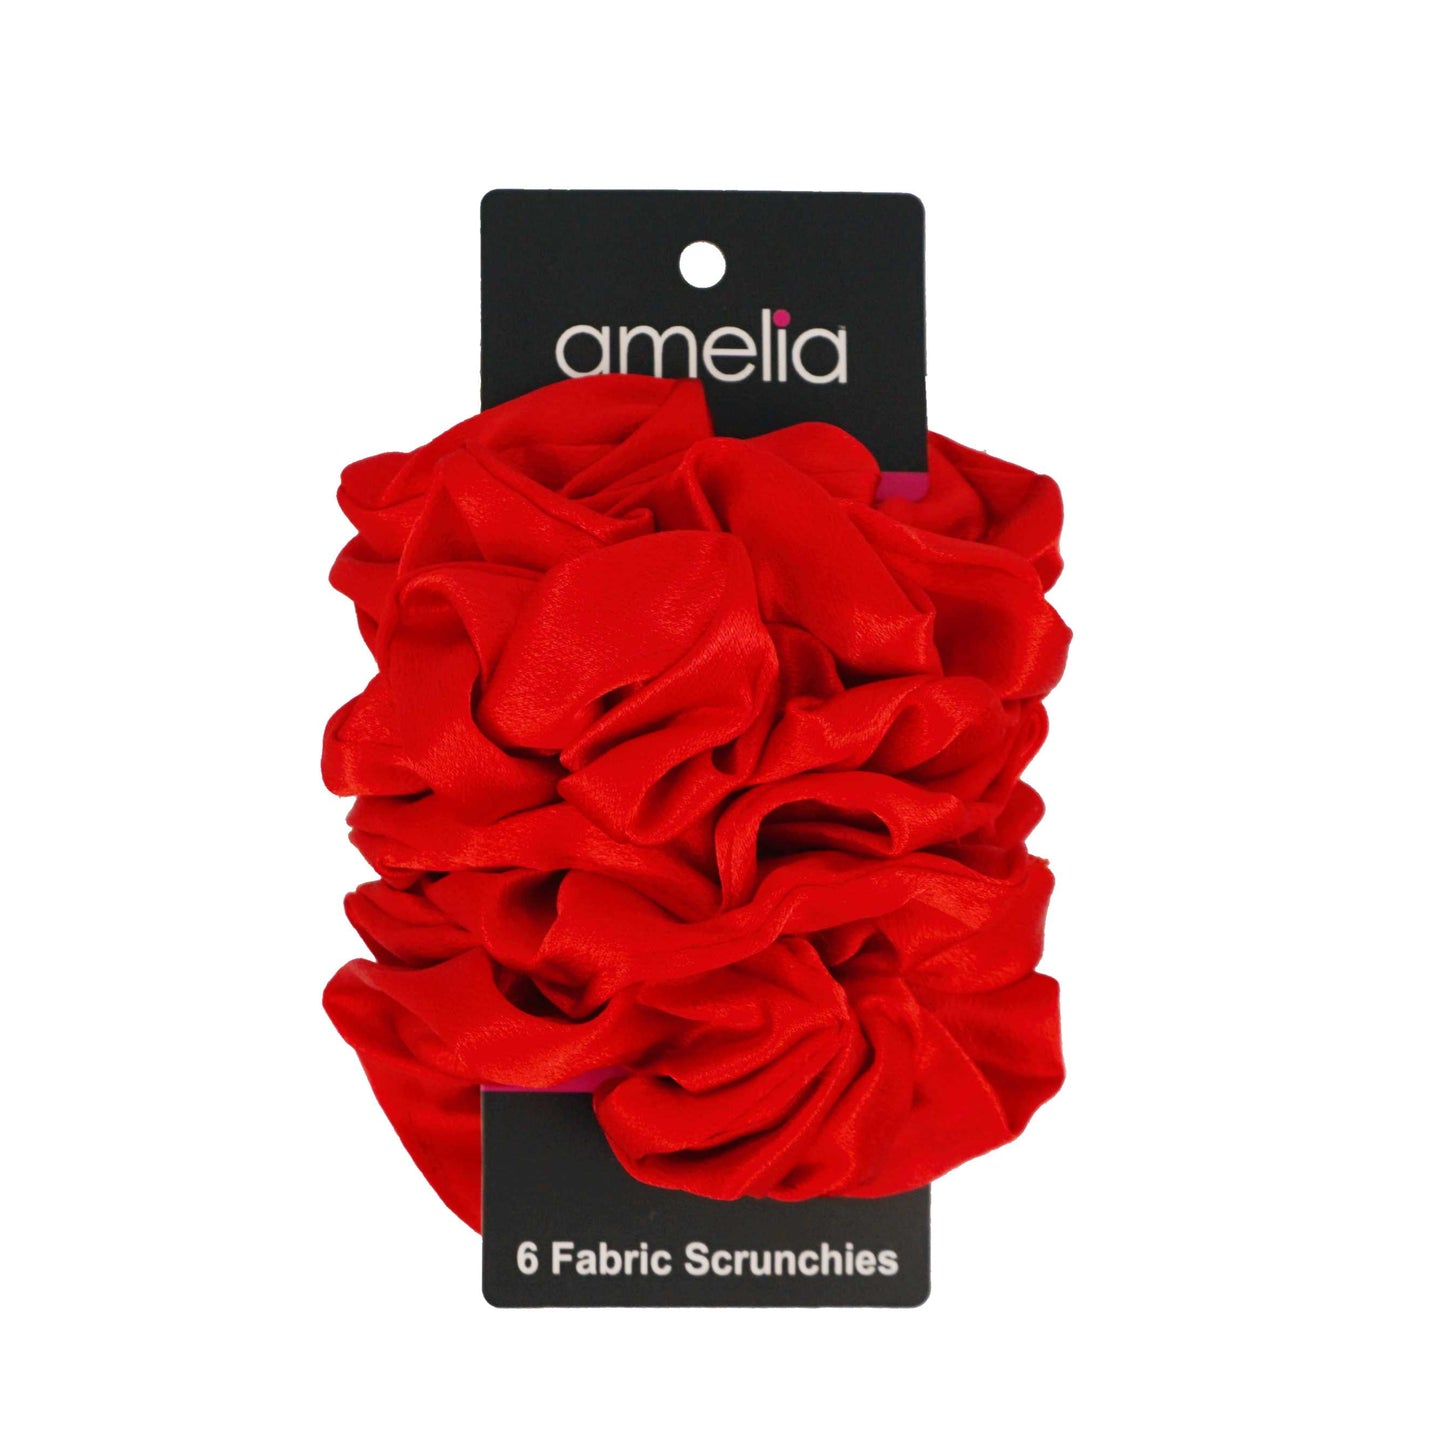 Amelia Beauty Products, Red Scrunchies, 4.5in Diameter, Gentle on Hair, Strong Hold, No Snag, No Dents or Creases. 6 Pack